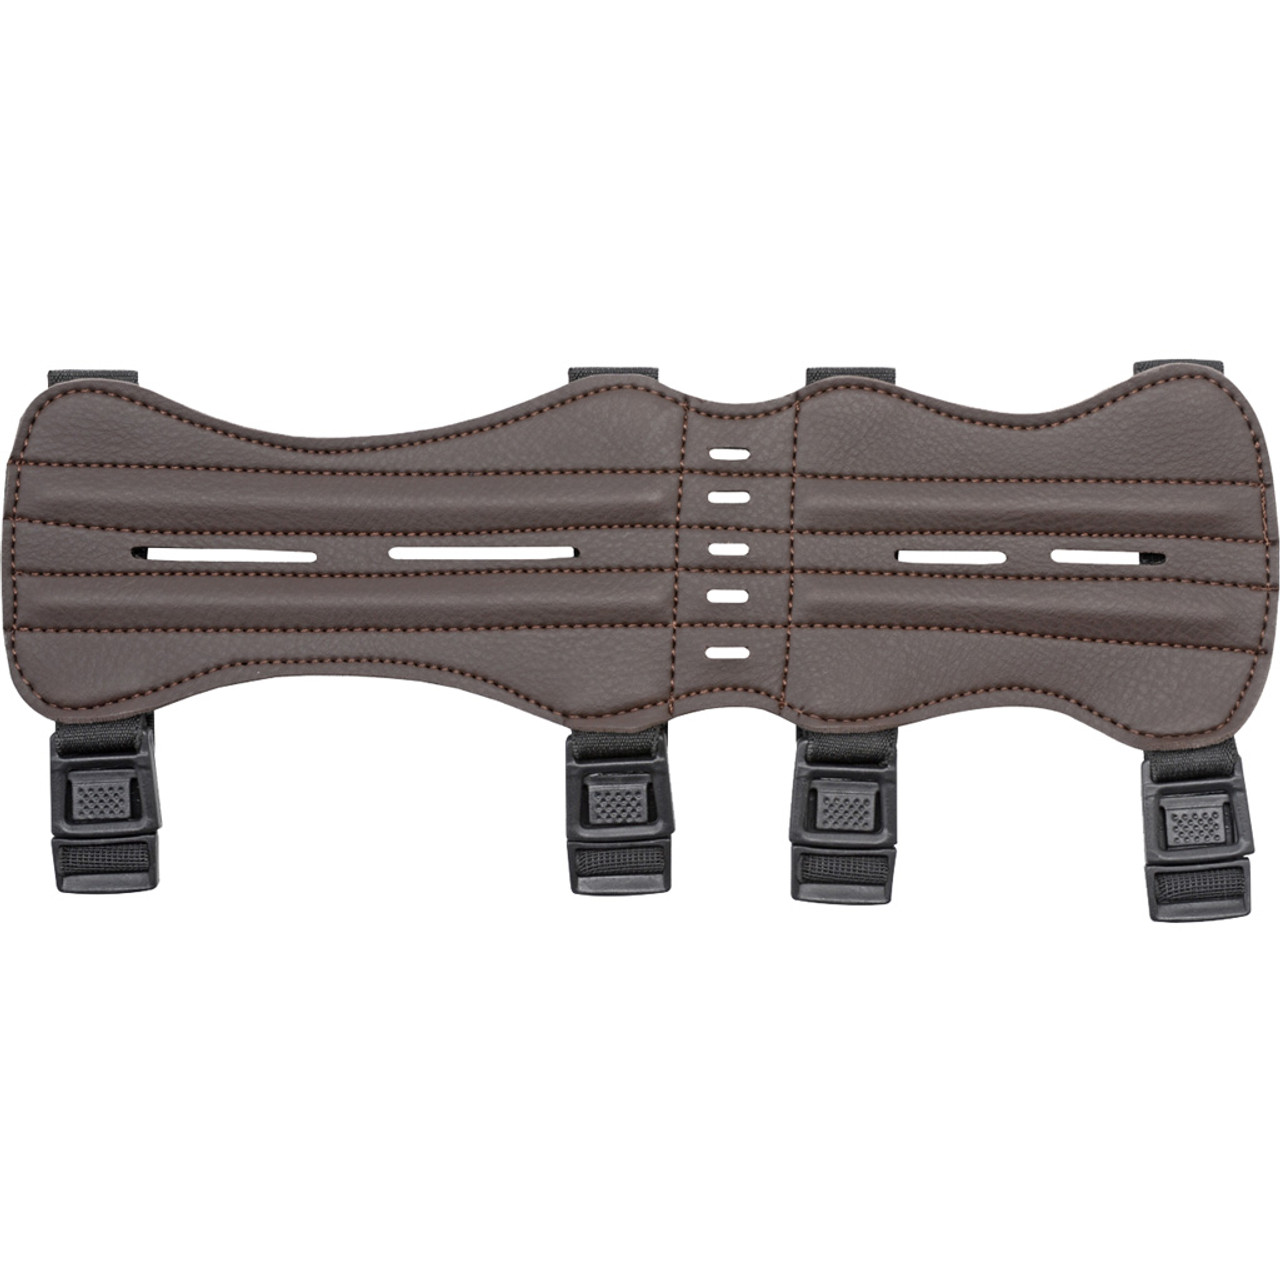 30-06 - PAAG29-1 - 30-06 Pro Am Arm Guard Brown